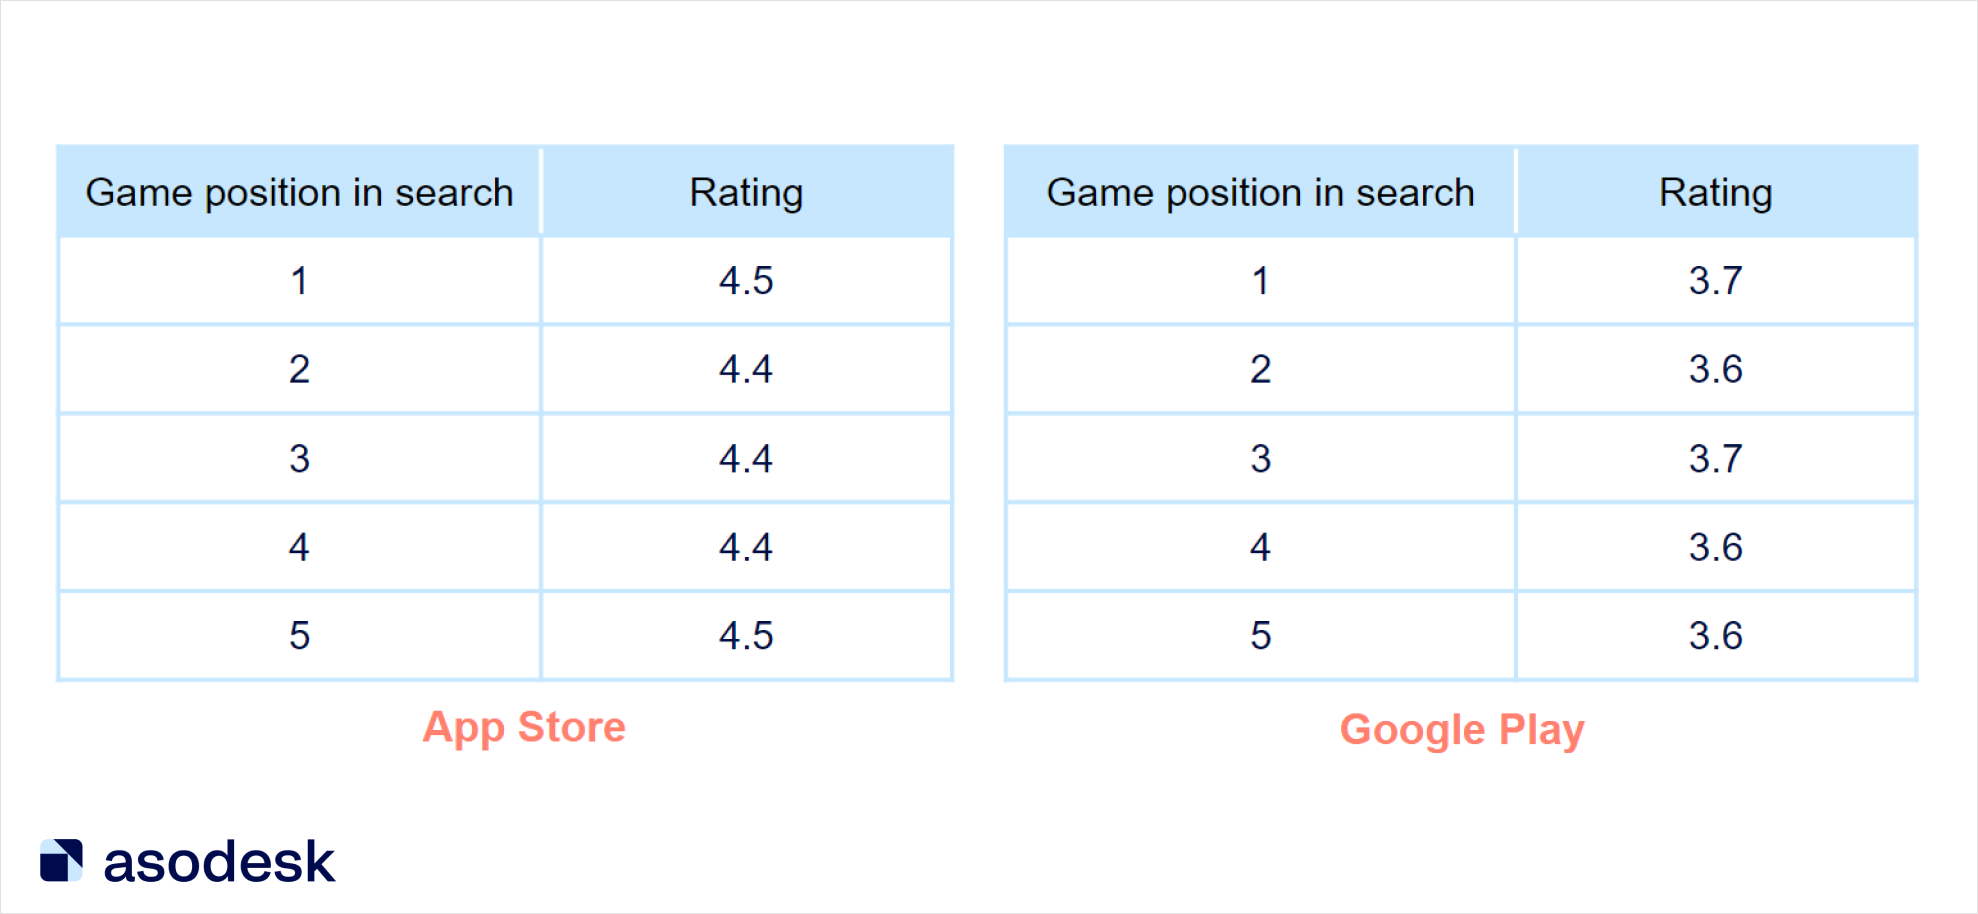 Rating of games from the first 5 positions in the App Store and Google Play